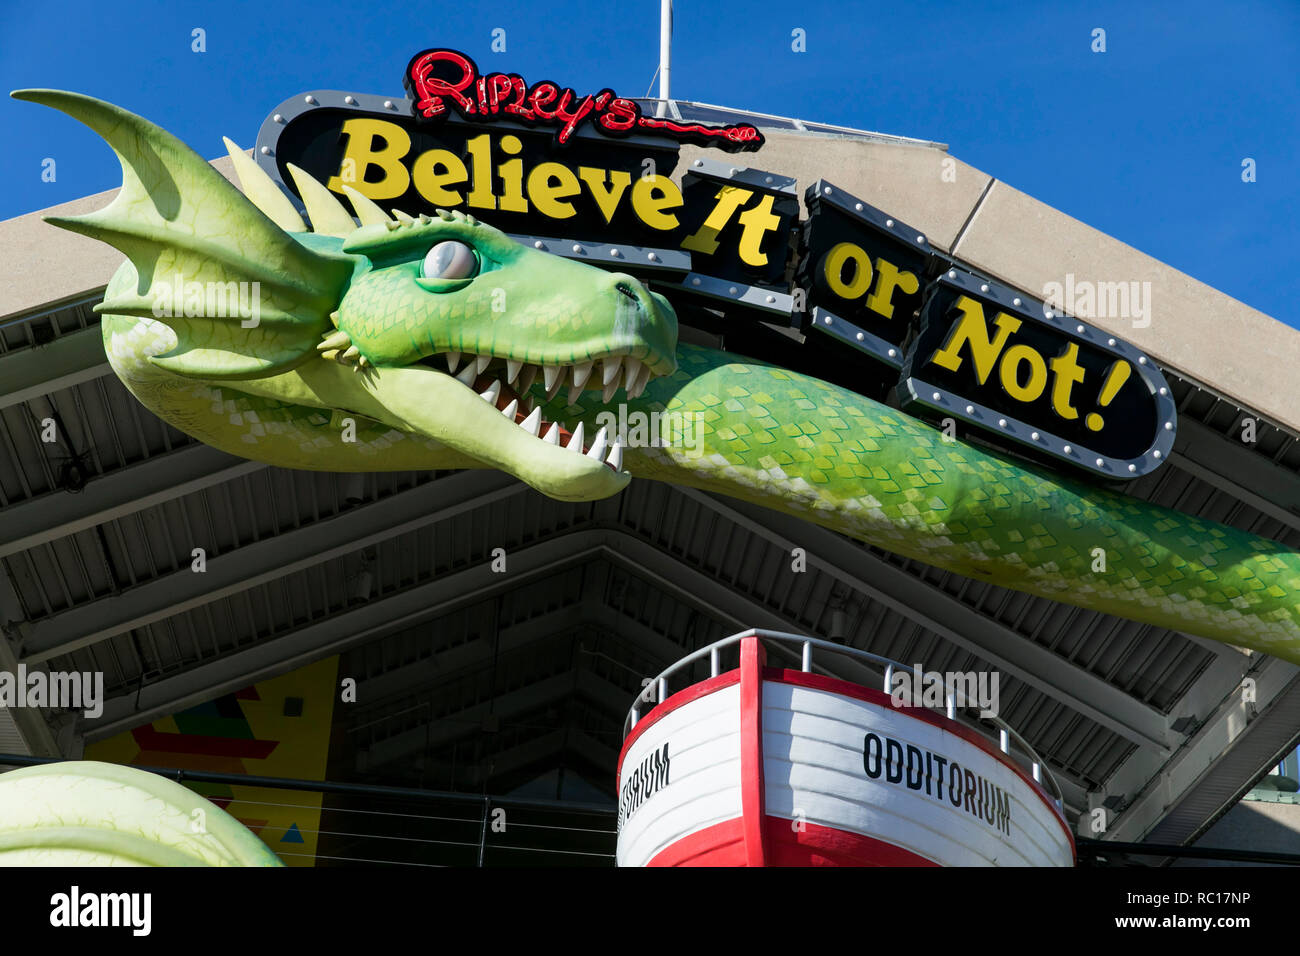 A logo sign outside of a Ripley's Believe It or Not location in Baltimore, Maryland on January 11, 2019. Stock Photo